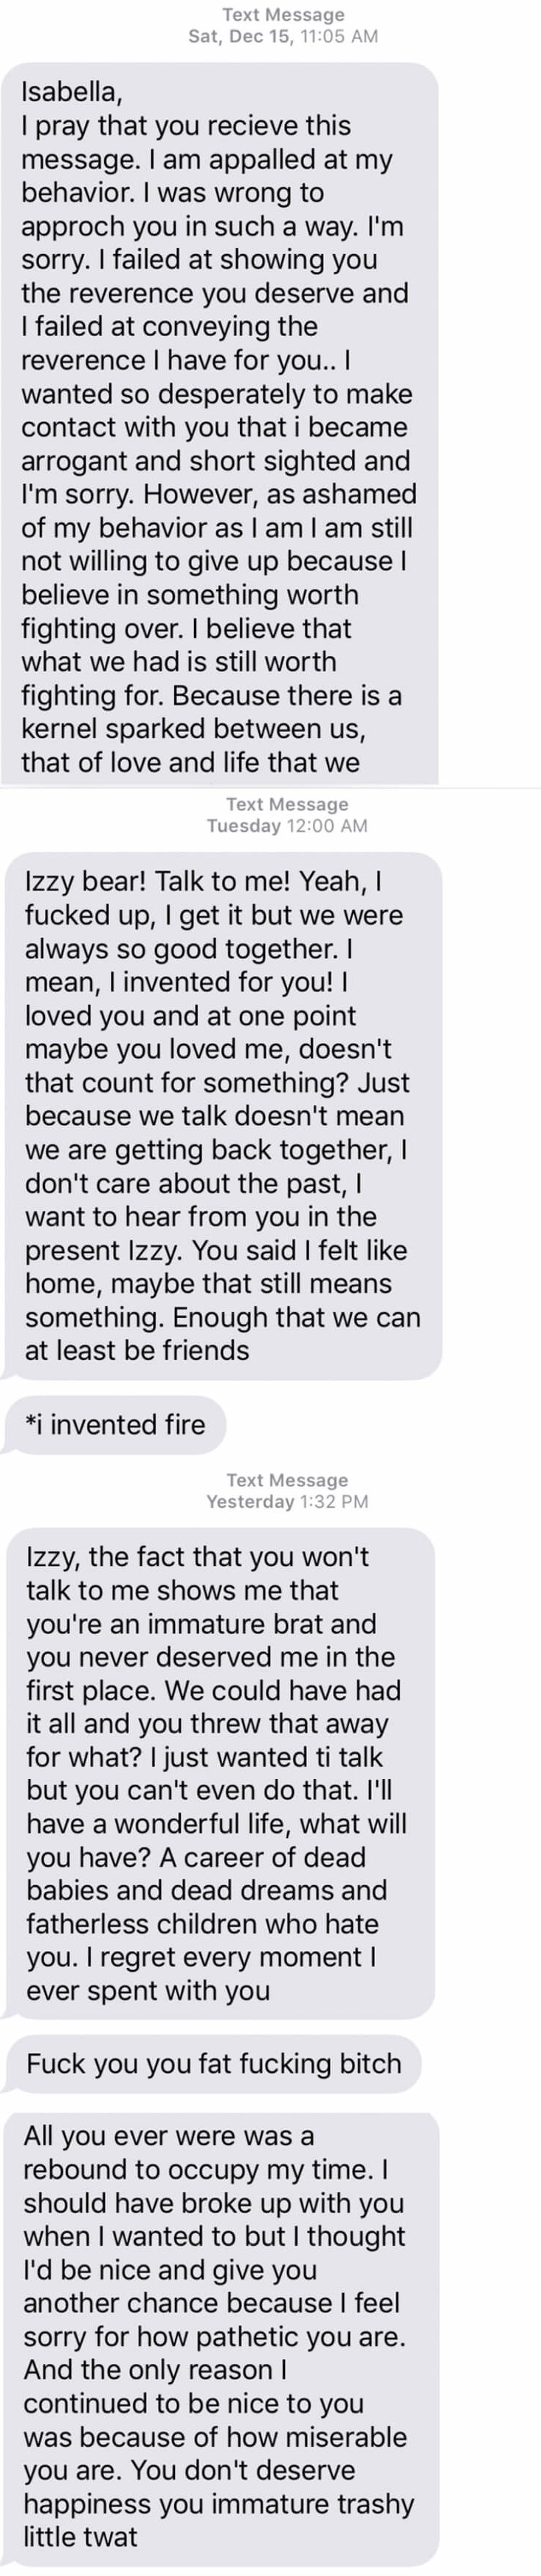 long messages from a guy apologizing and begging to be friends then calling her a rebound and saying she didn&#x27;t deserve him and doesn&#x27;t deserve happiness